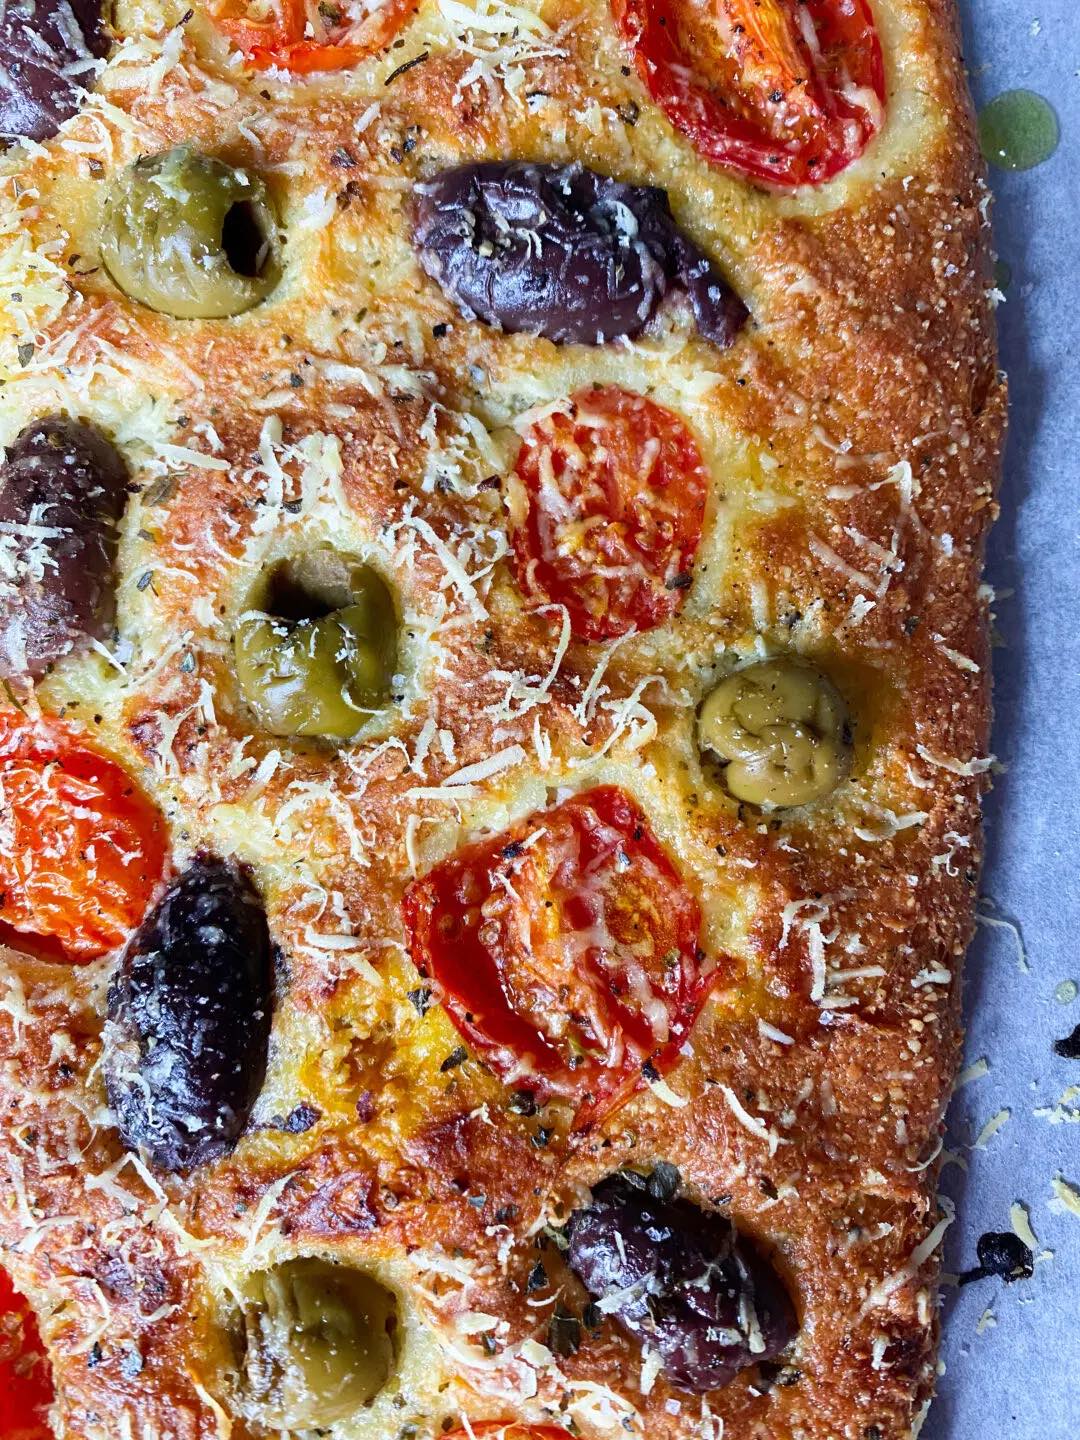 KETO FATHEAD FOCACCIA WITH OLIVES AND TOMATOES